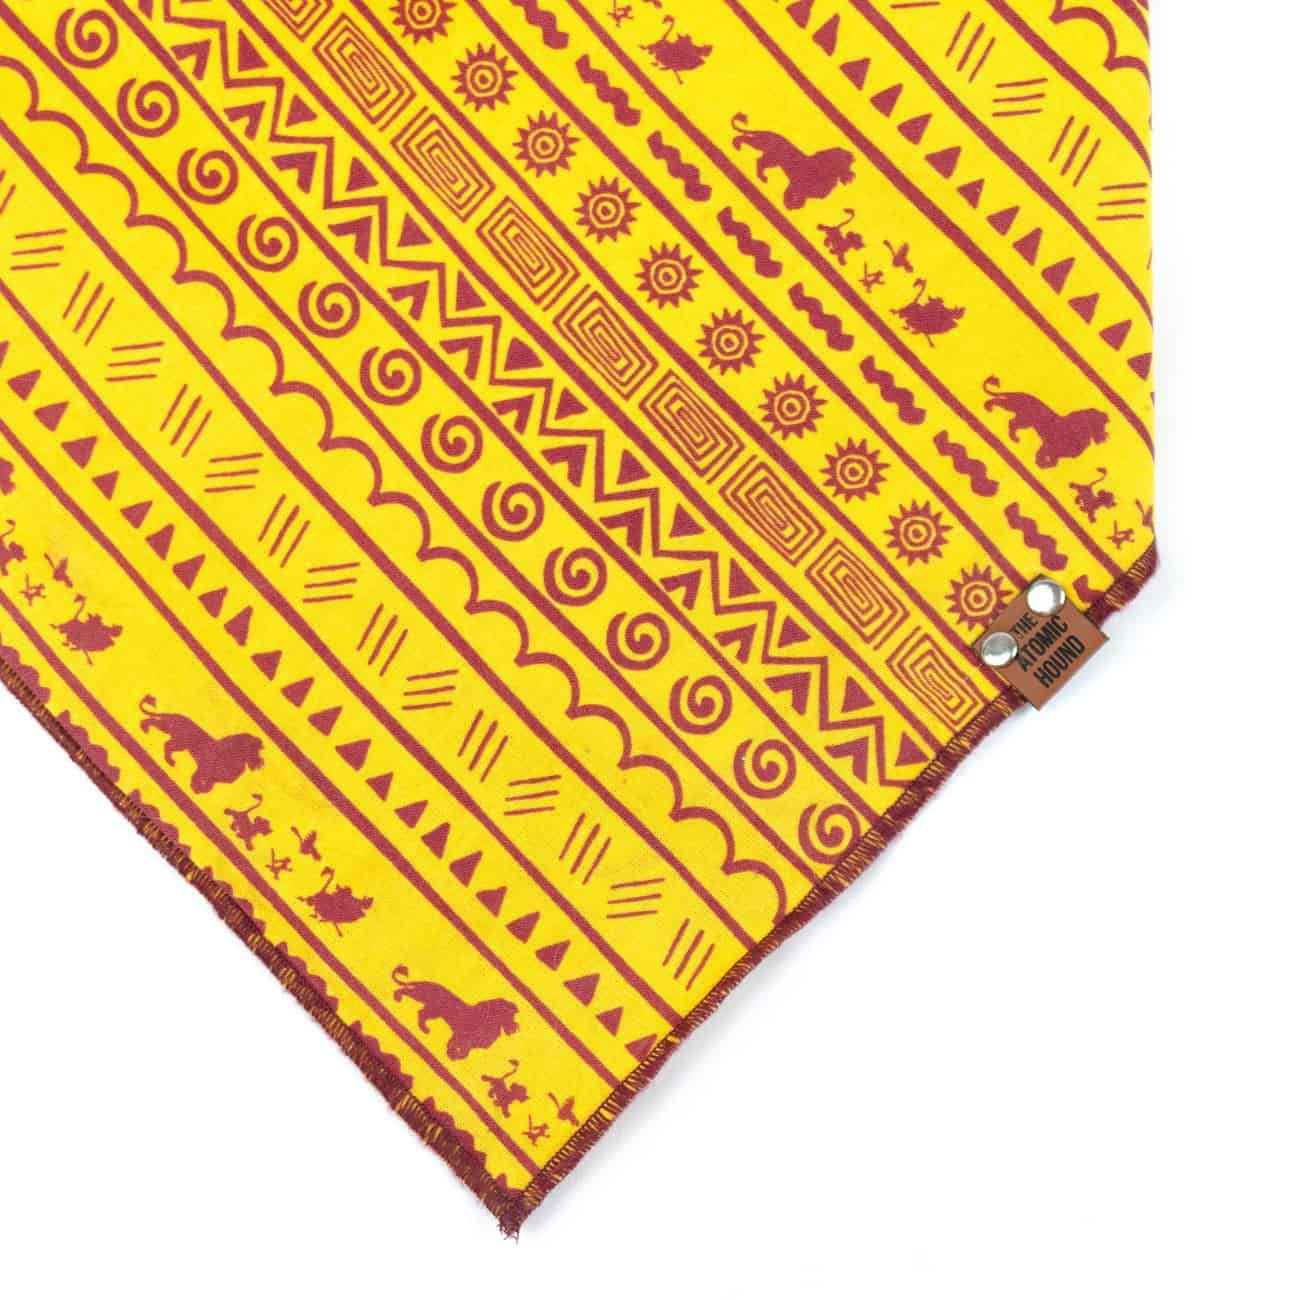 Yellow and maroon dog bandana with Lion King character pattern